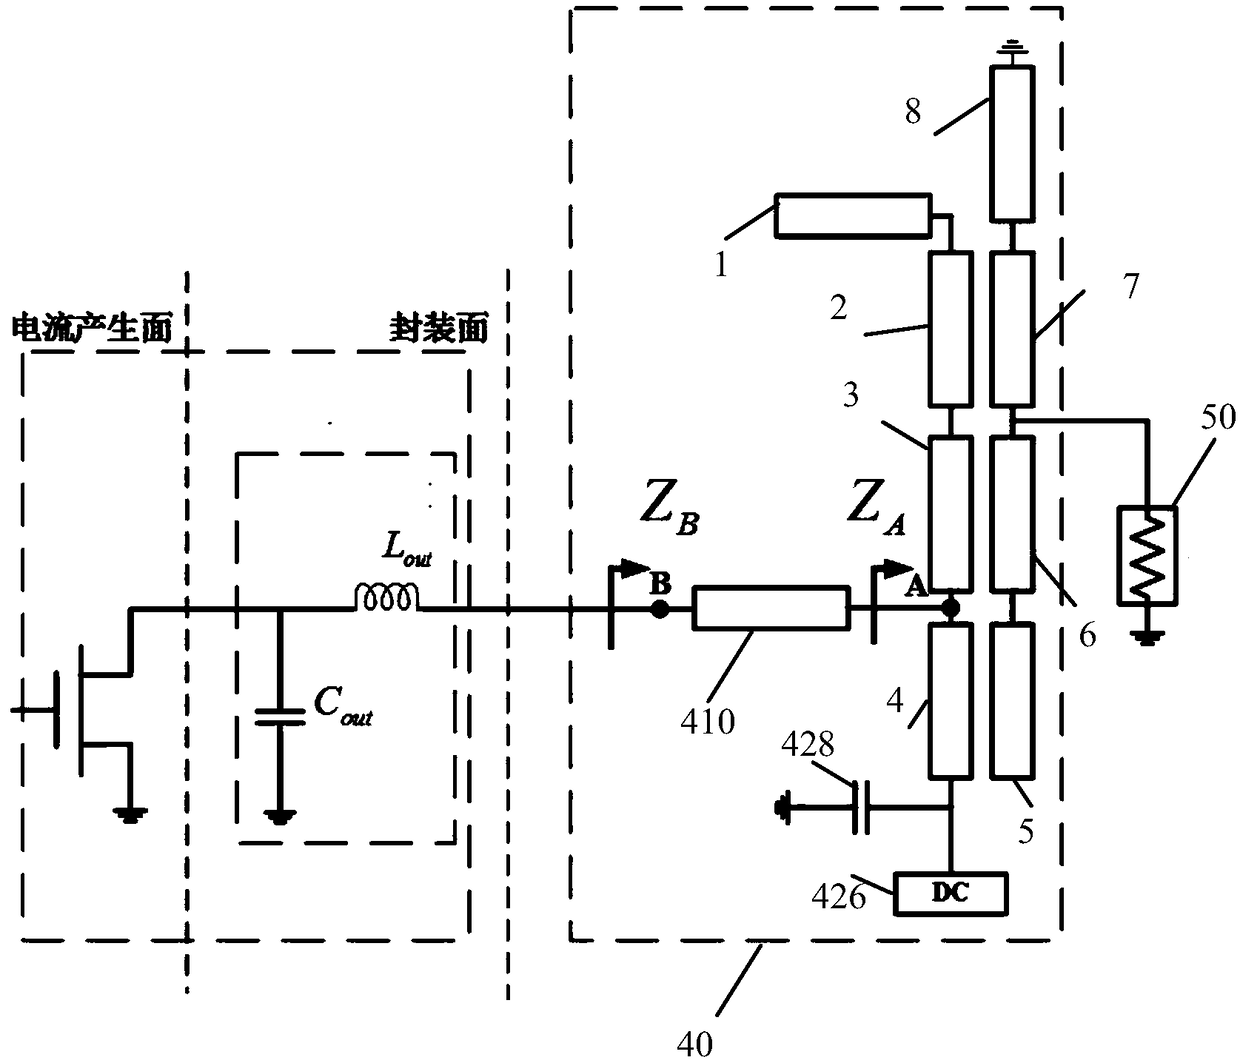 Broadband bandpass filter power amplifier based on frequency selective coupling